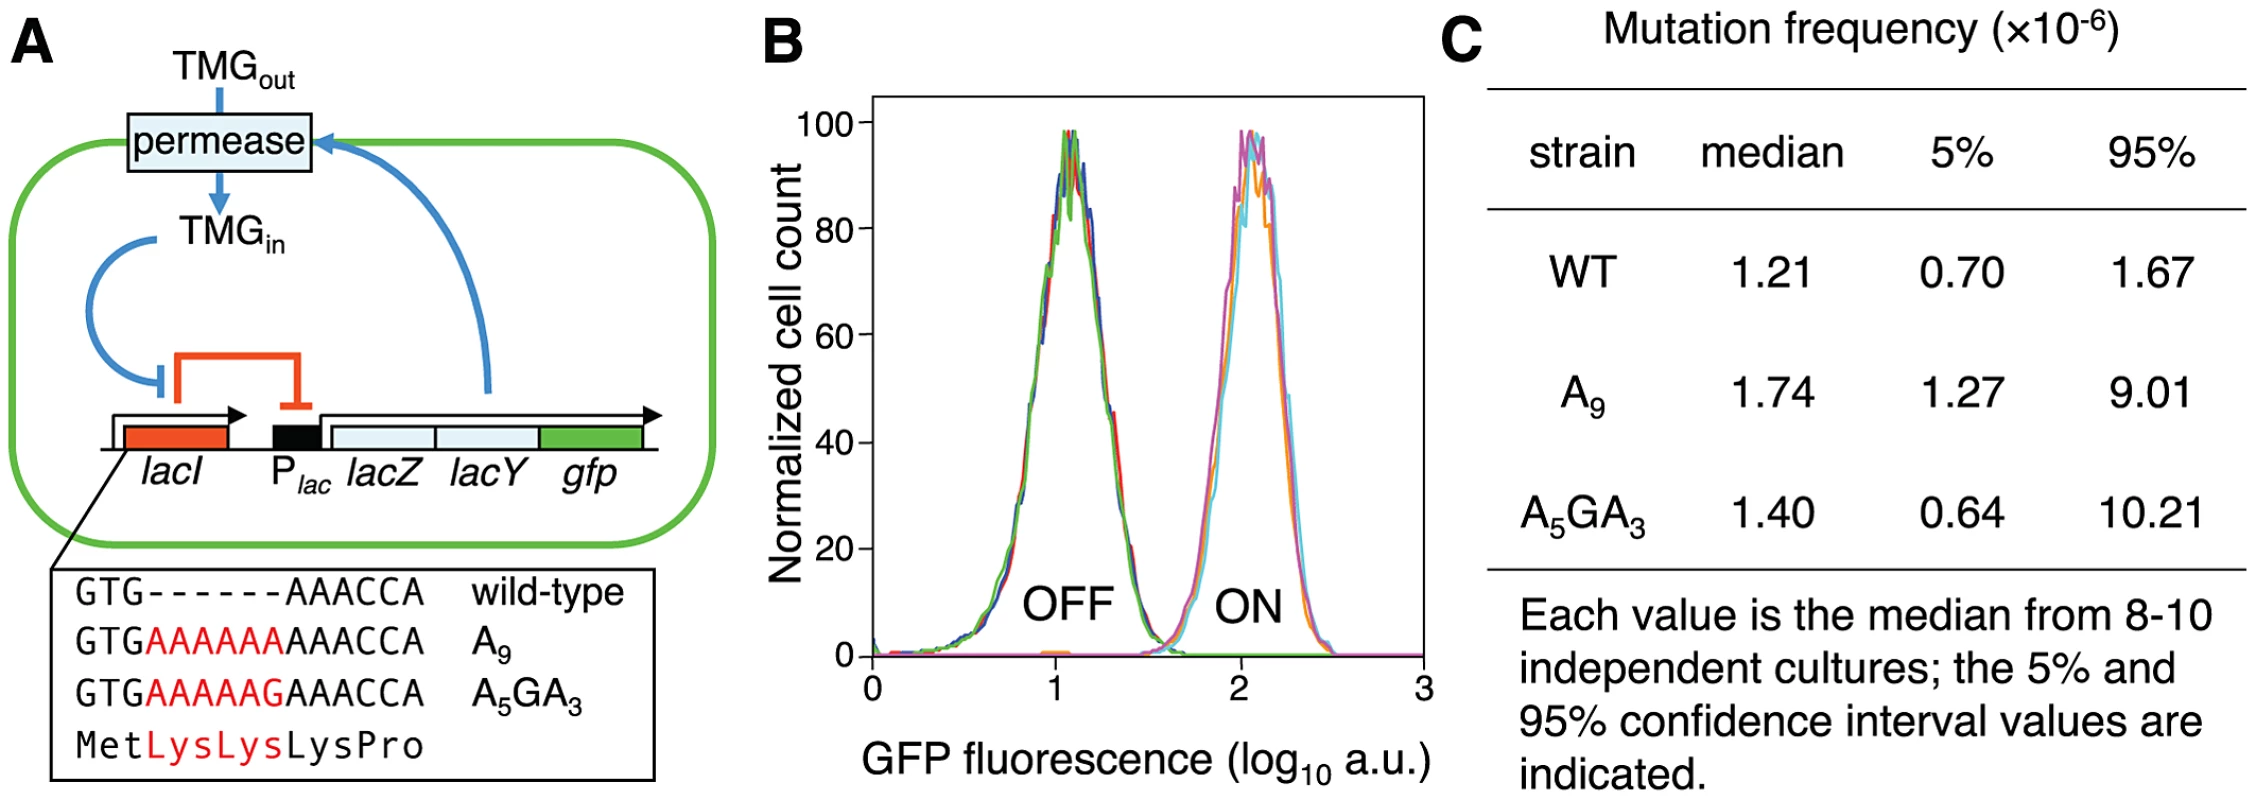 Novel system to study the consequences of error-prone transcription sequences.